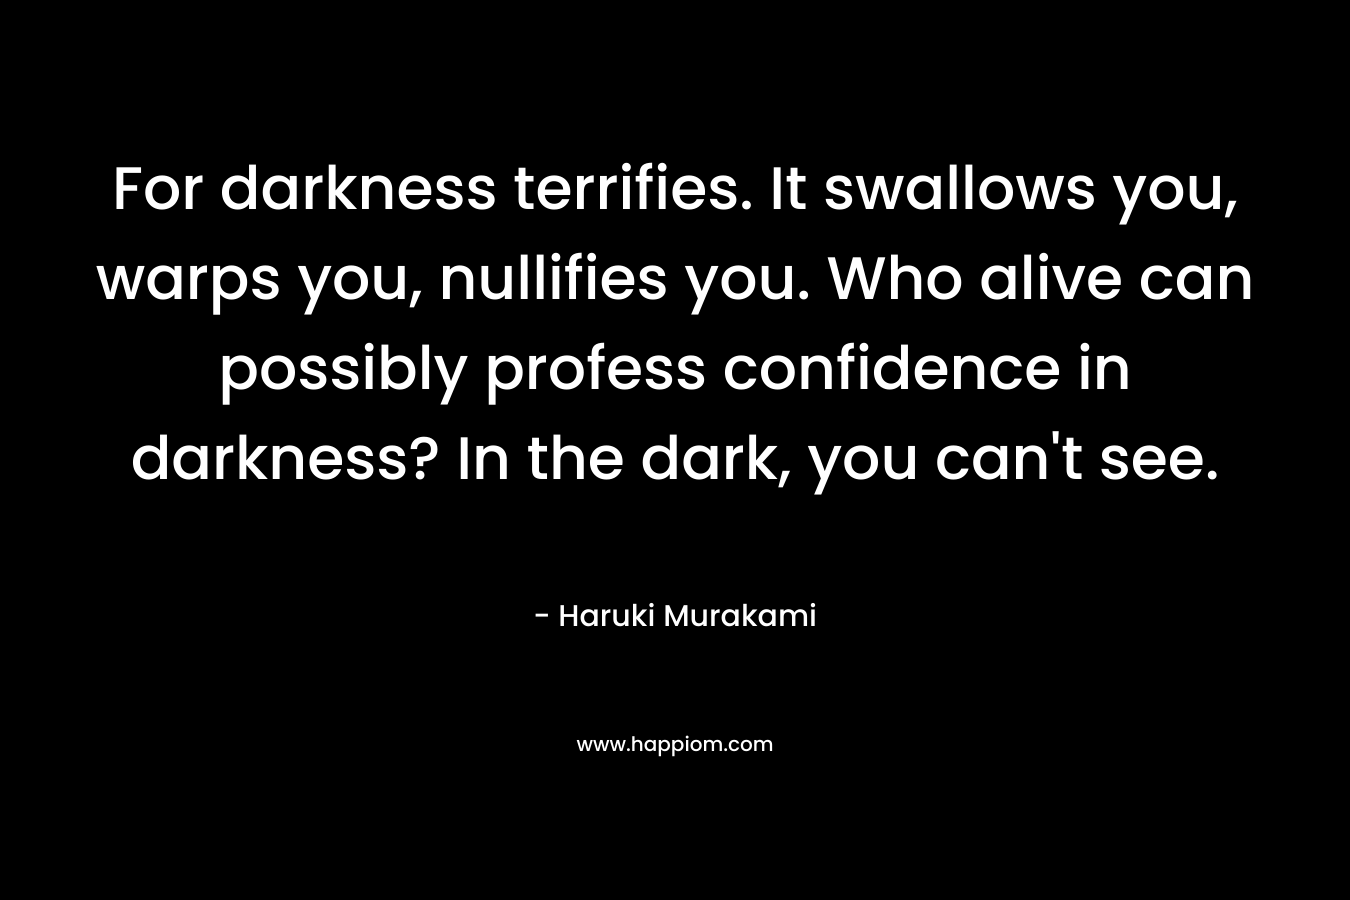 For darkness terrifies. It swallows you, warps you, nullifies you. Who alive can possibly profess confidence in darkness? In the dark, you can’t see. – Haruki Murakami